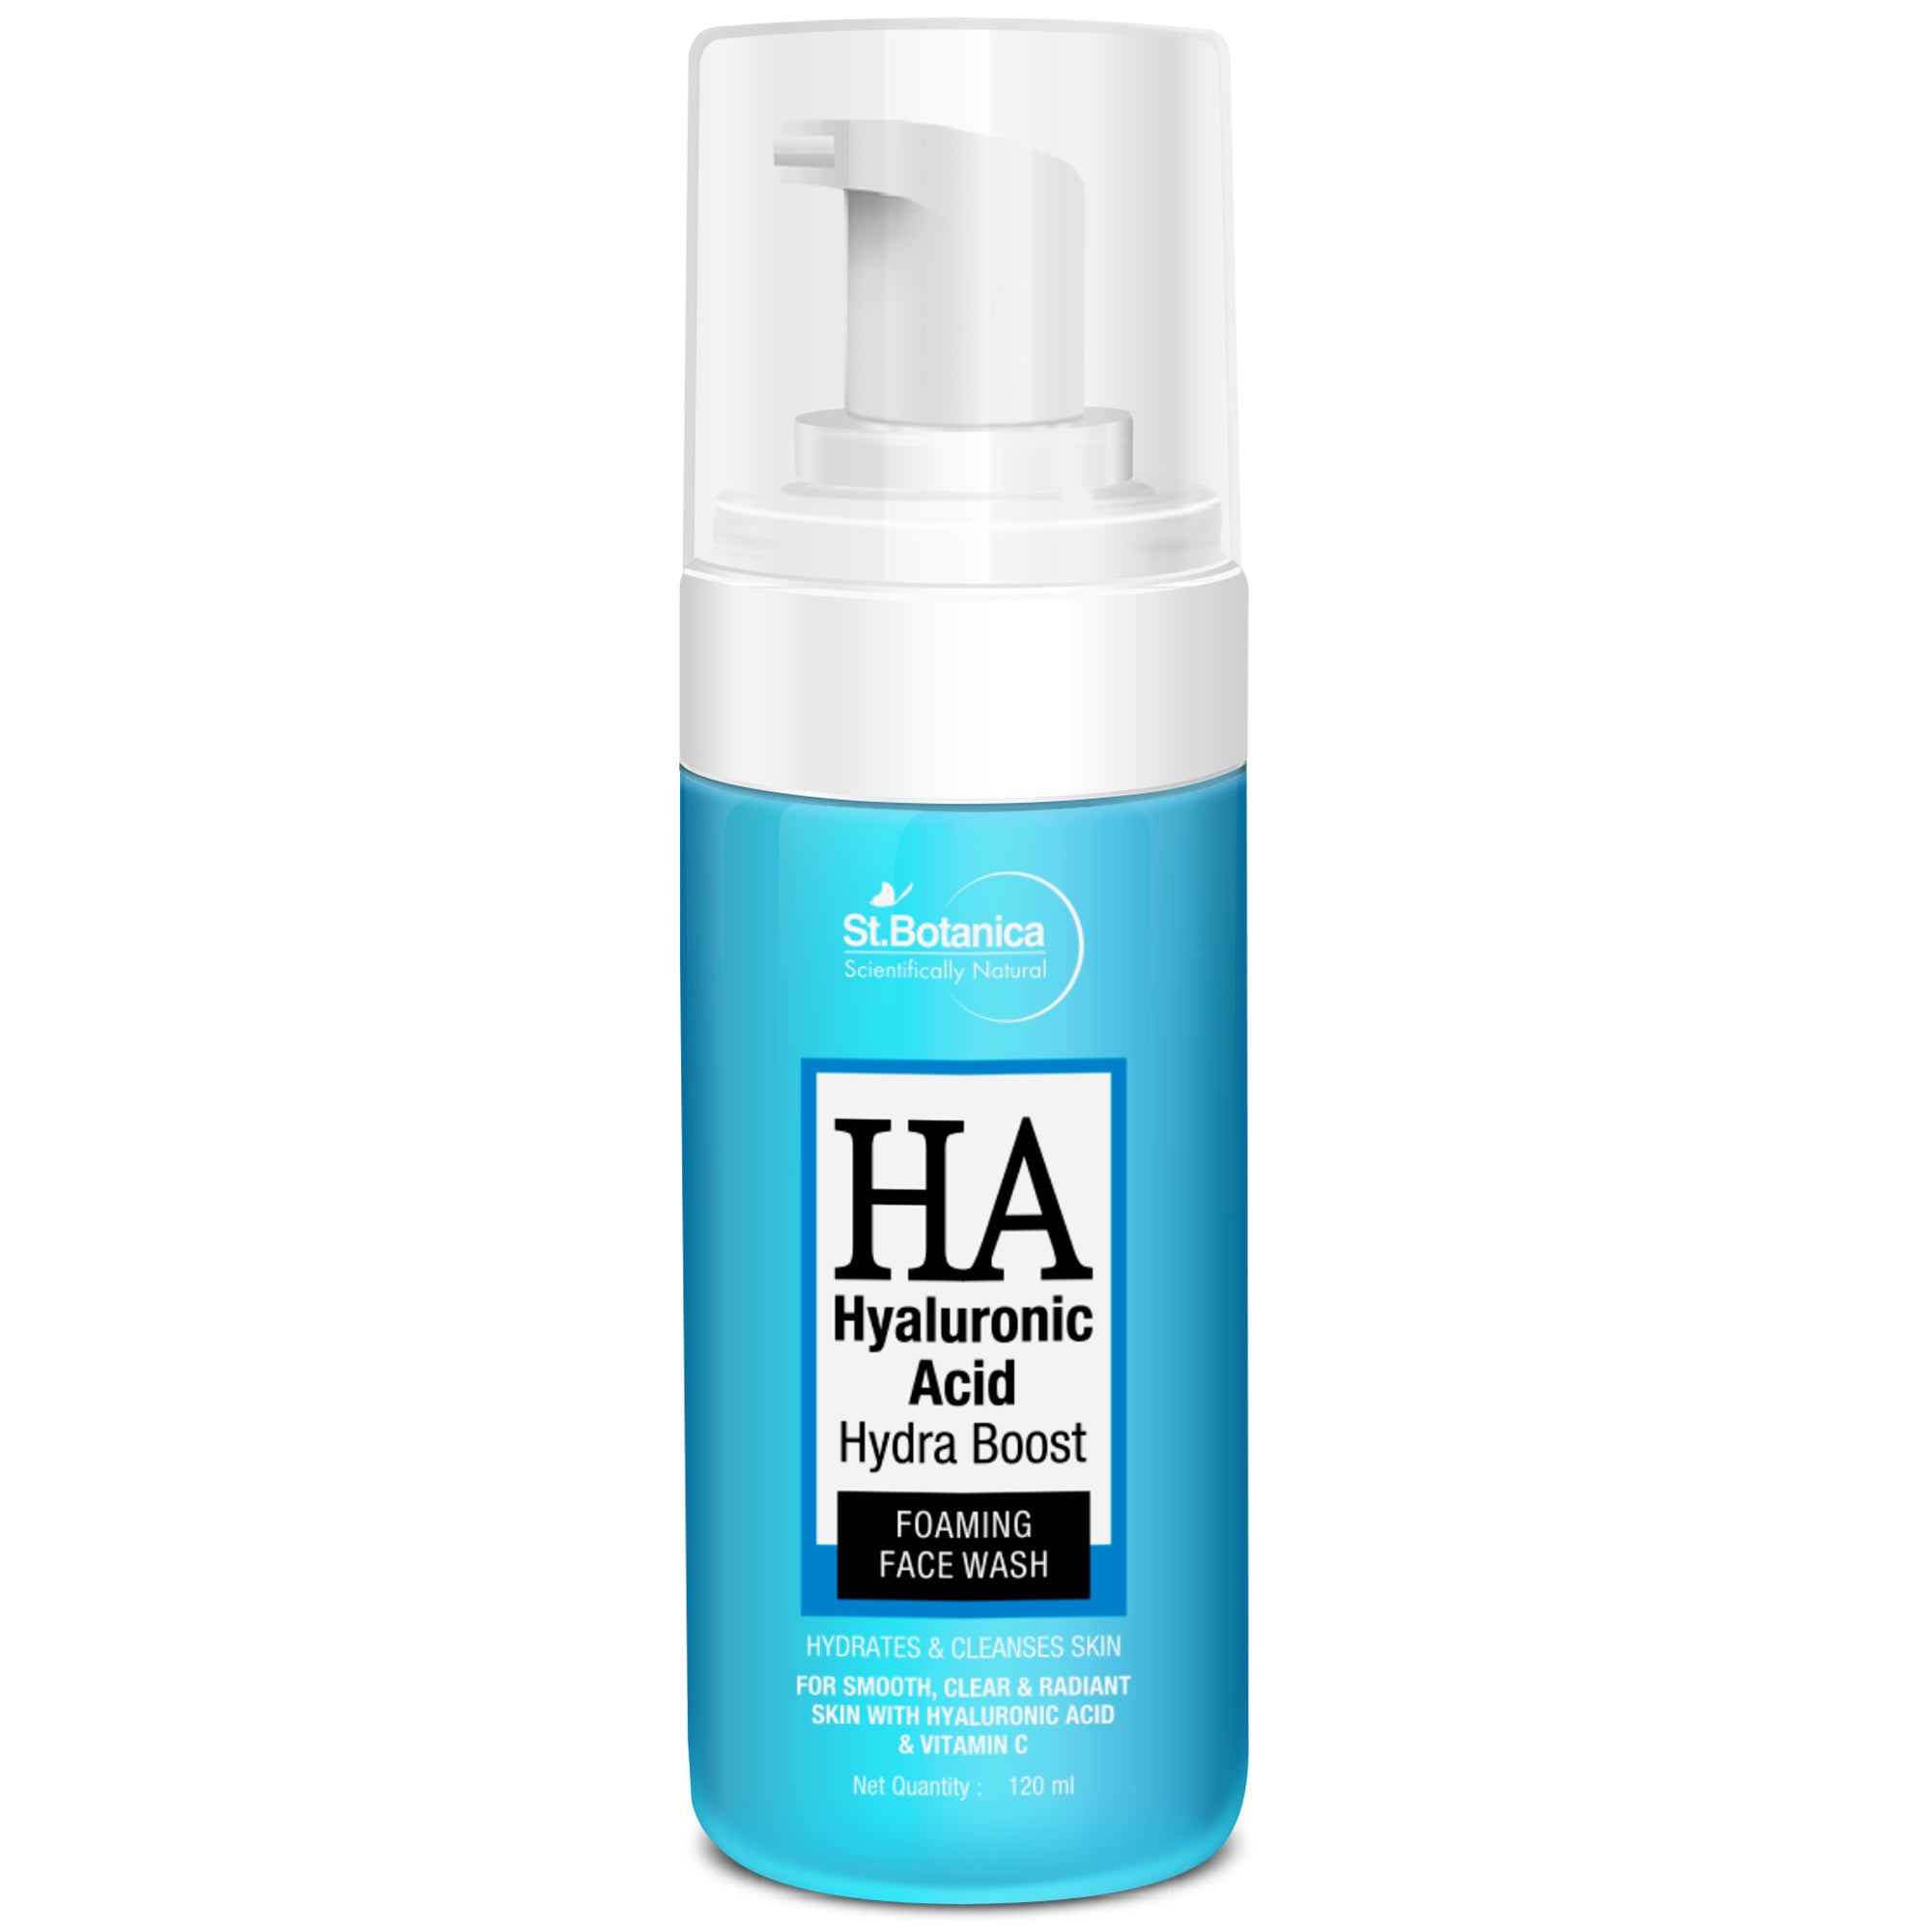 St.Botanica Hyaluronic Acid Hydra Boost Foaming Face Wash - No Parabens, Sulphate, Silicones, 120 ml (STBOT561)